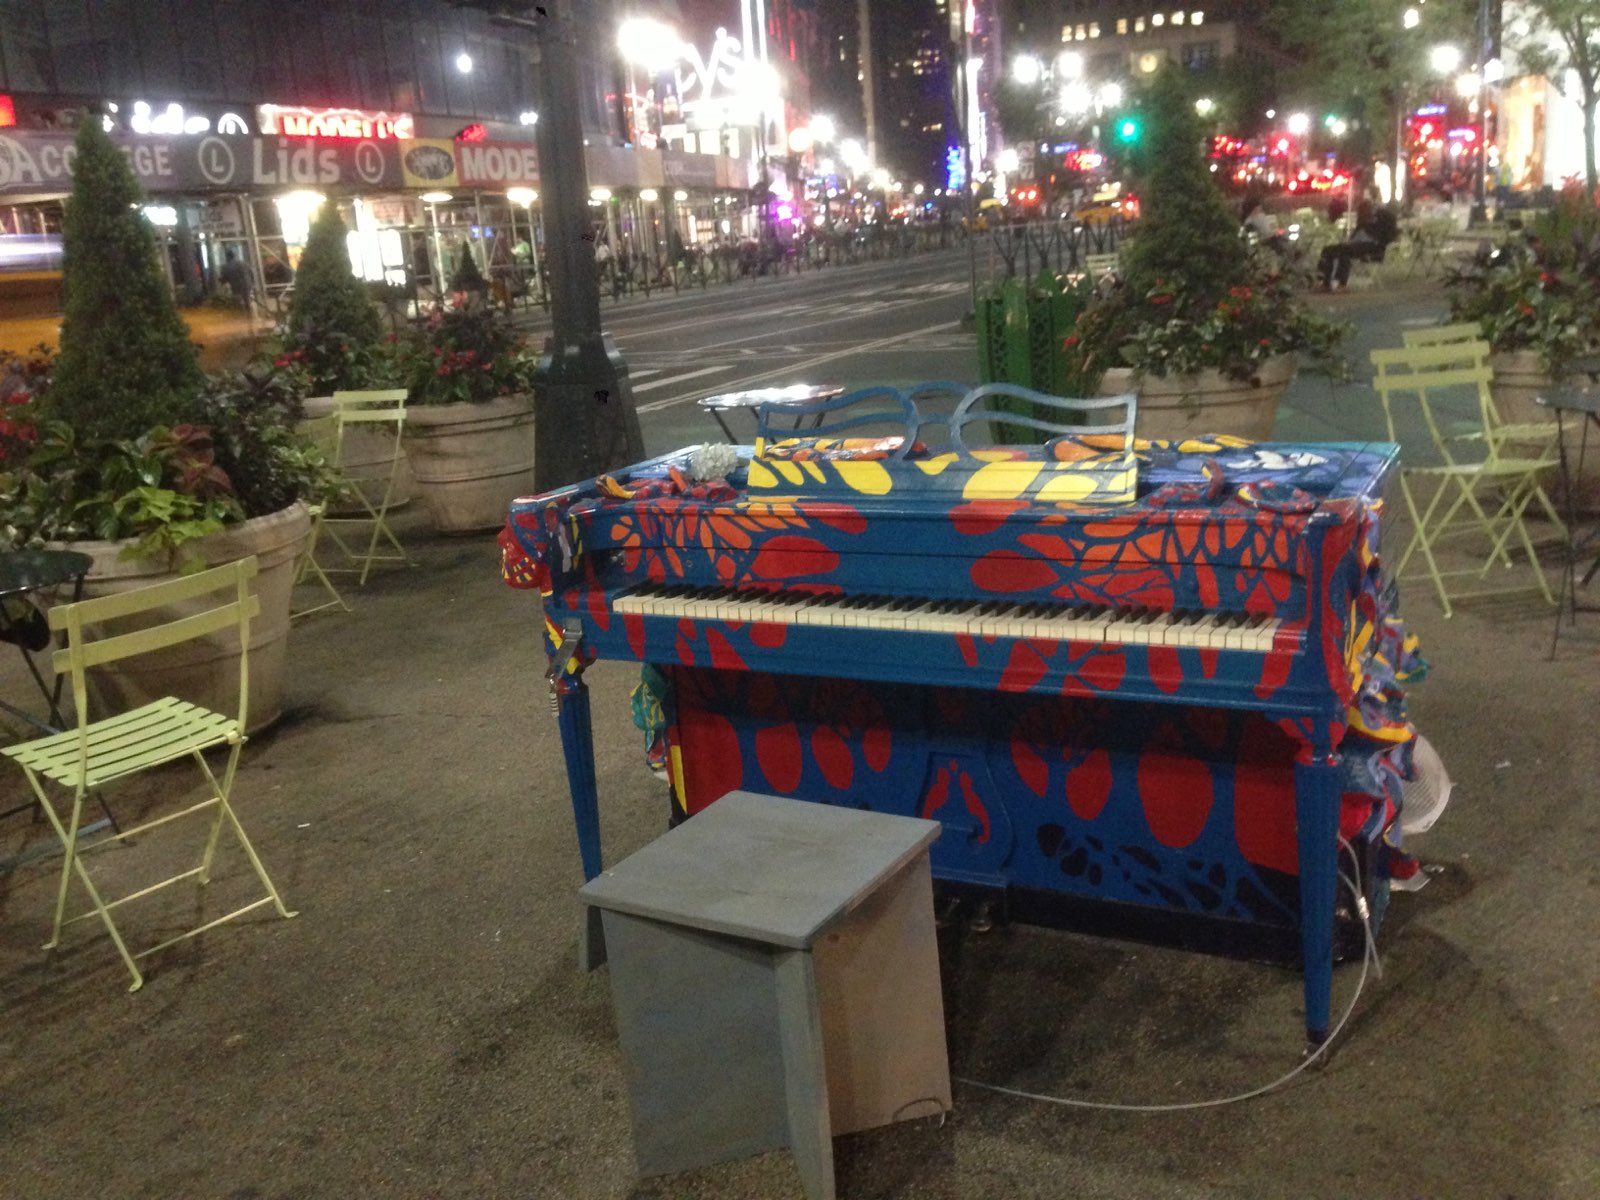 Piano at the Time Square